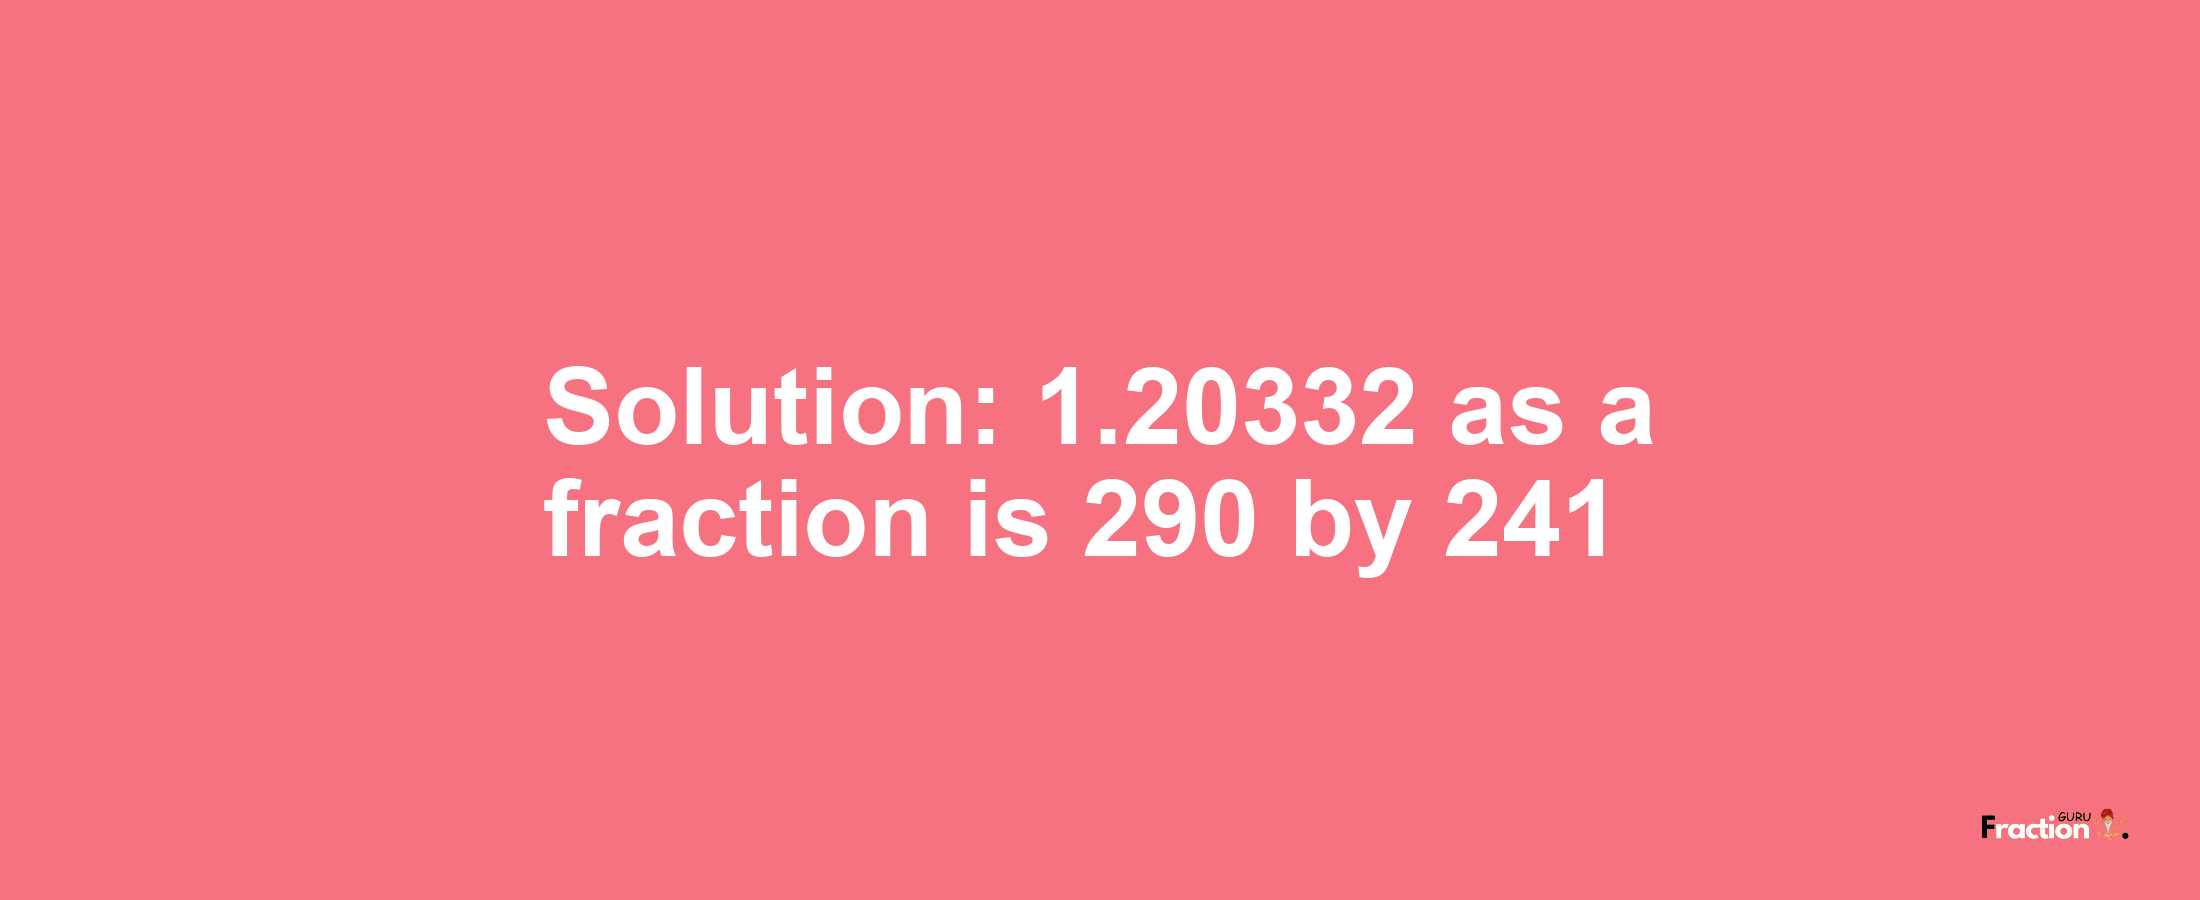 Solution:1.20332 as a fraction is 290/241